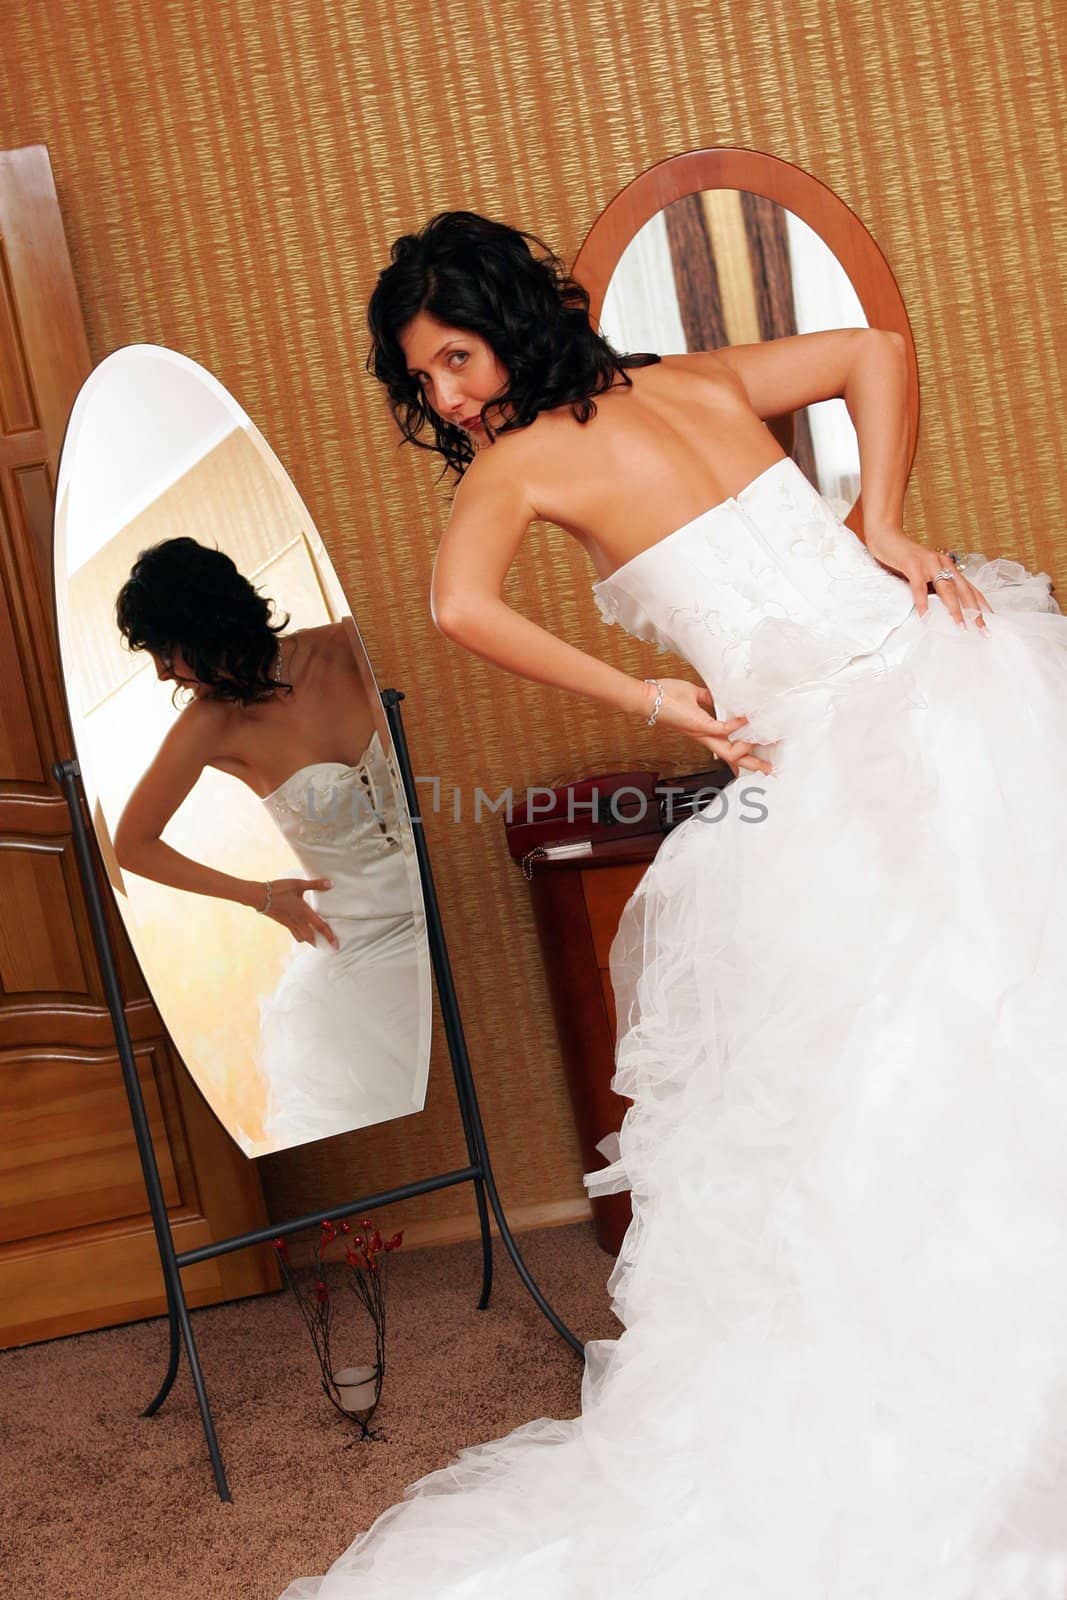 Rear view of bride trying on wedding dress and looking in mirror.